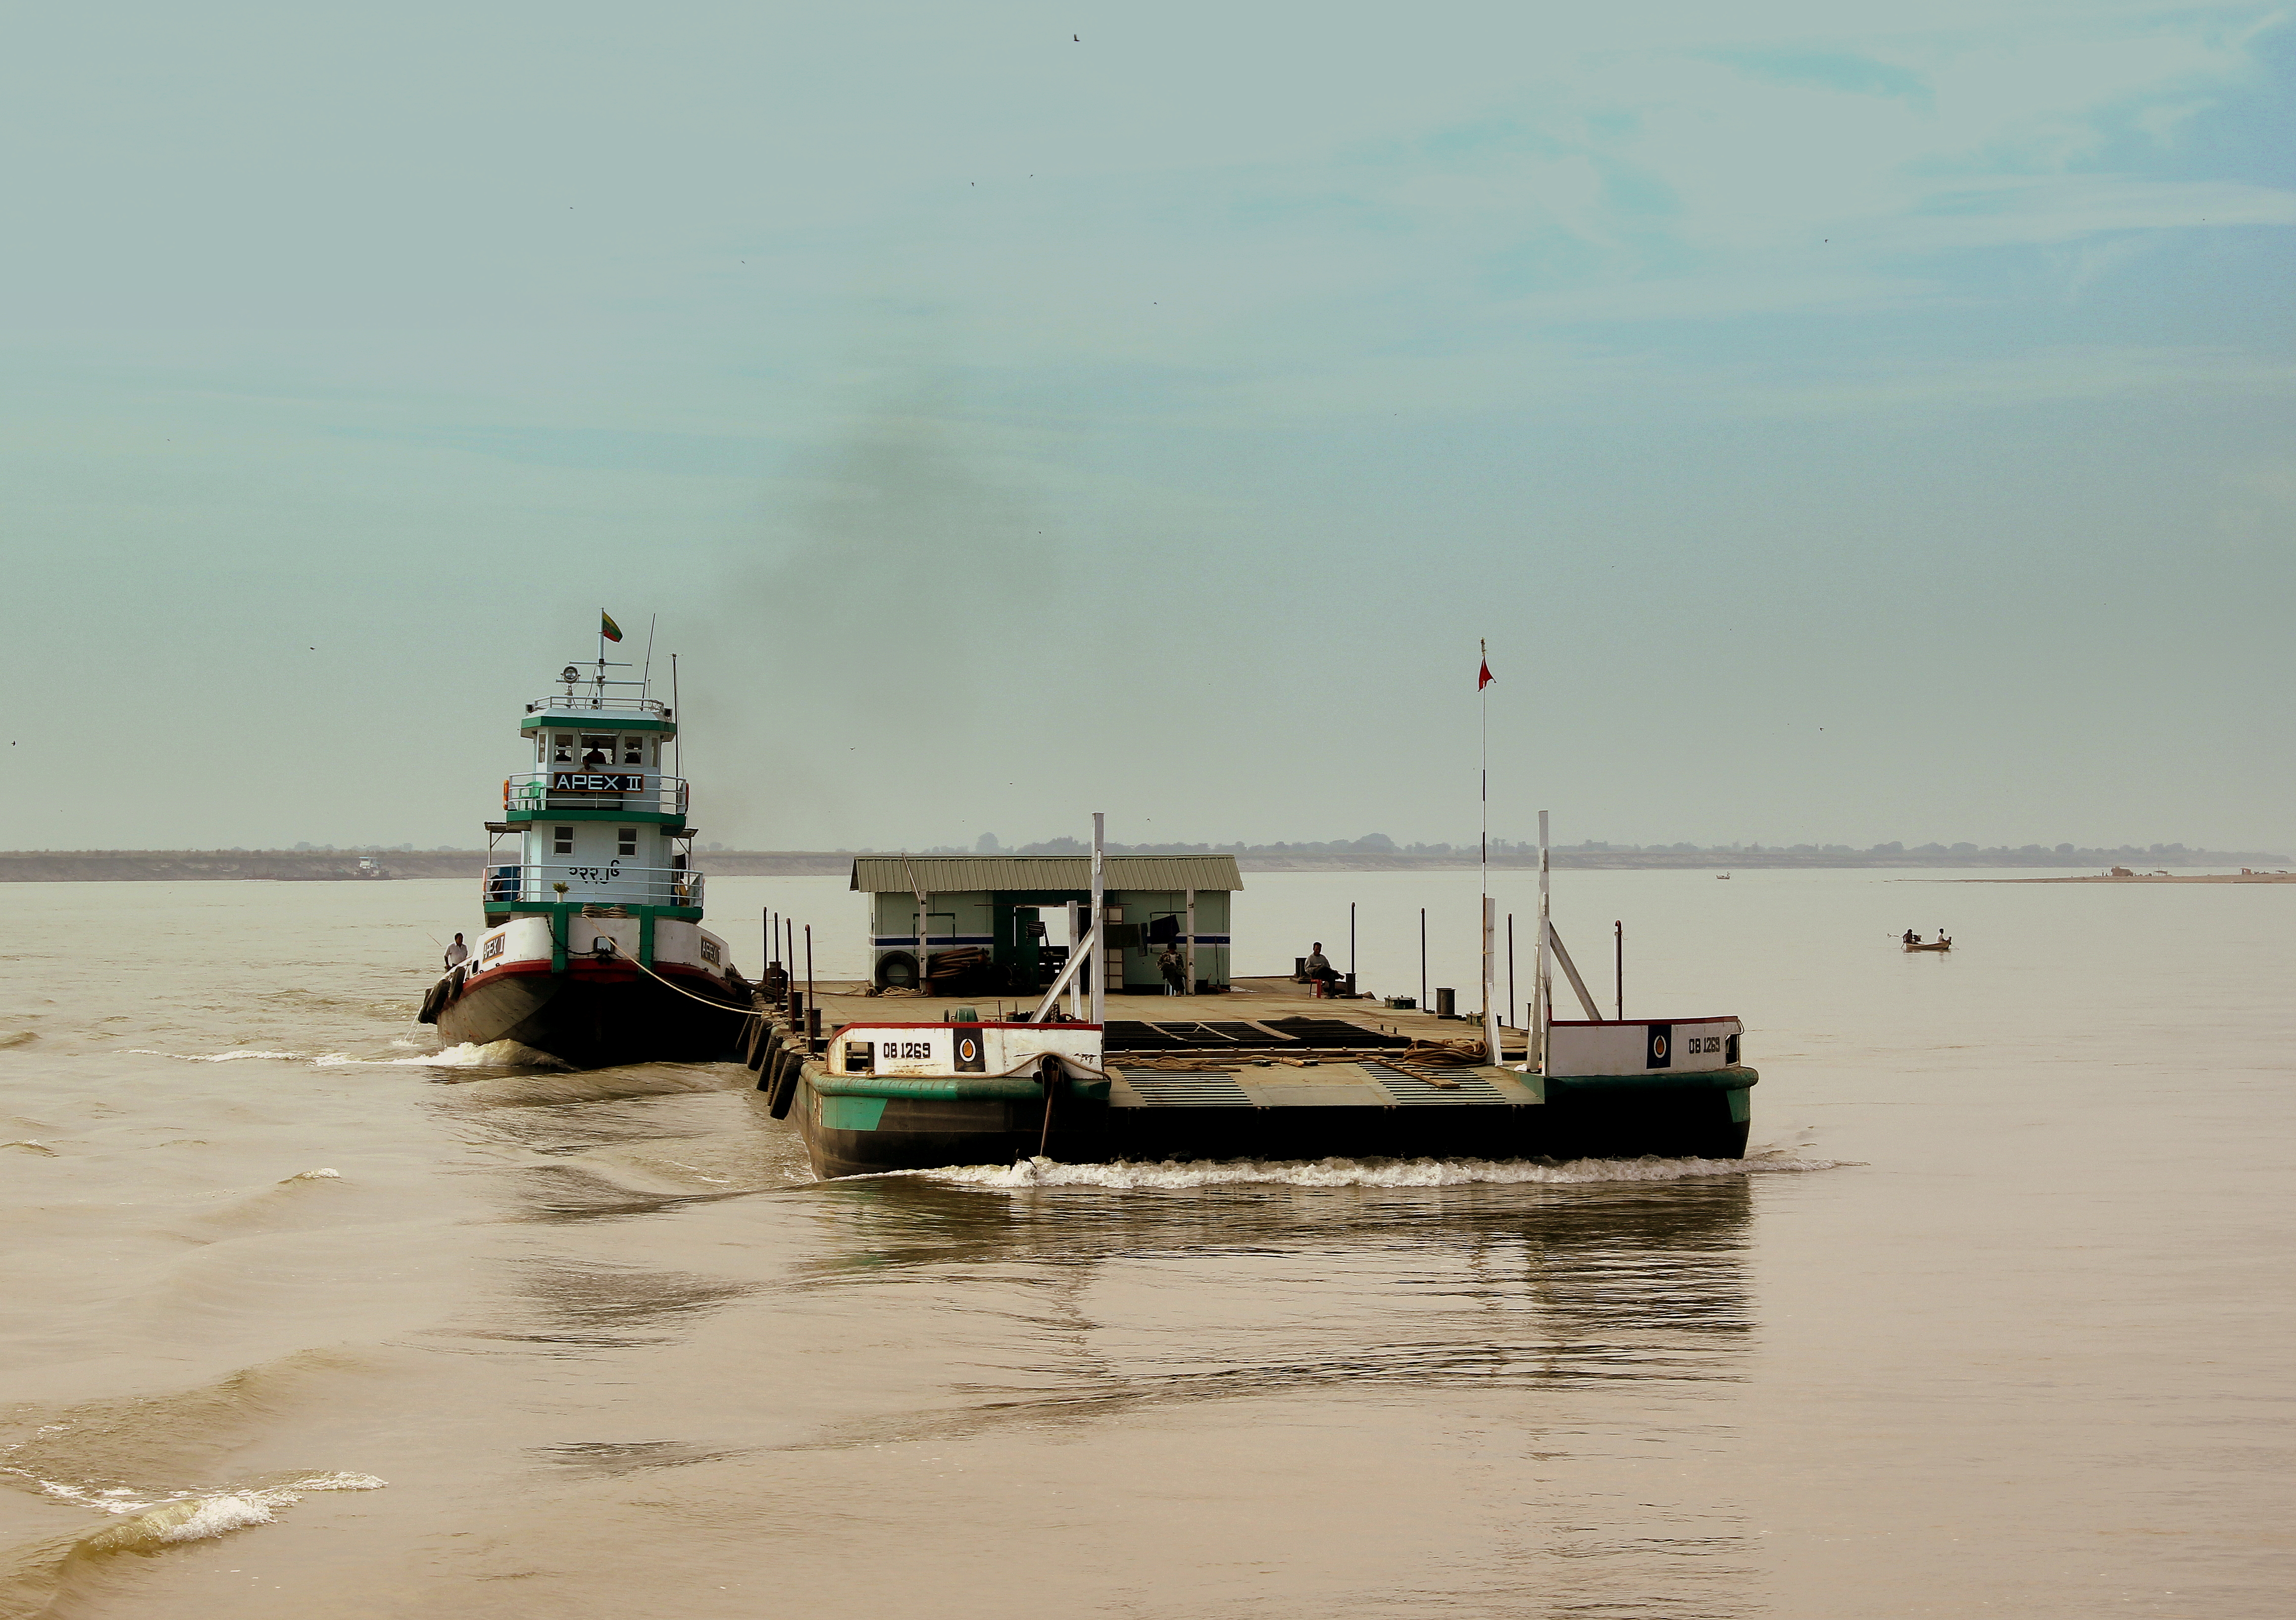 IRRAWADDY RIVER BARGE FERRY JOURNEY FROM BAGAN TO MANDALAY MYANMA FEB 2013 (8520024241)